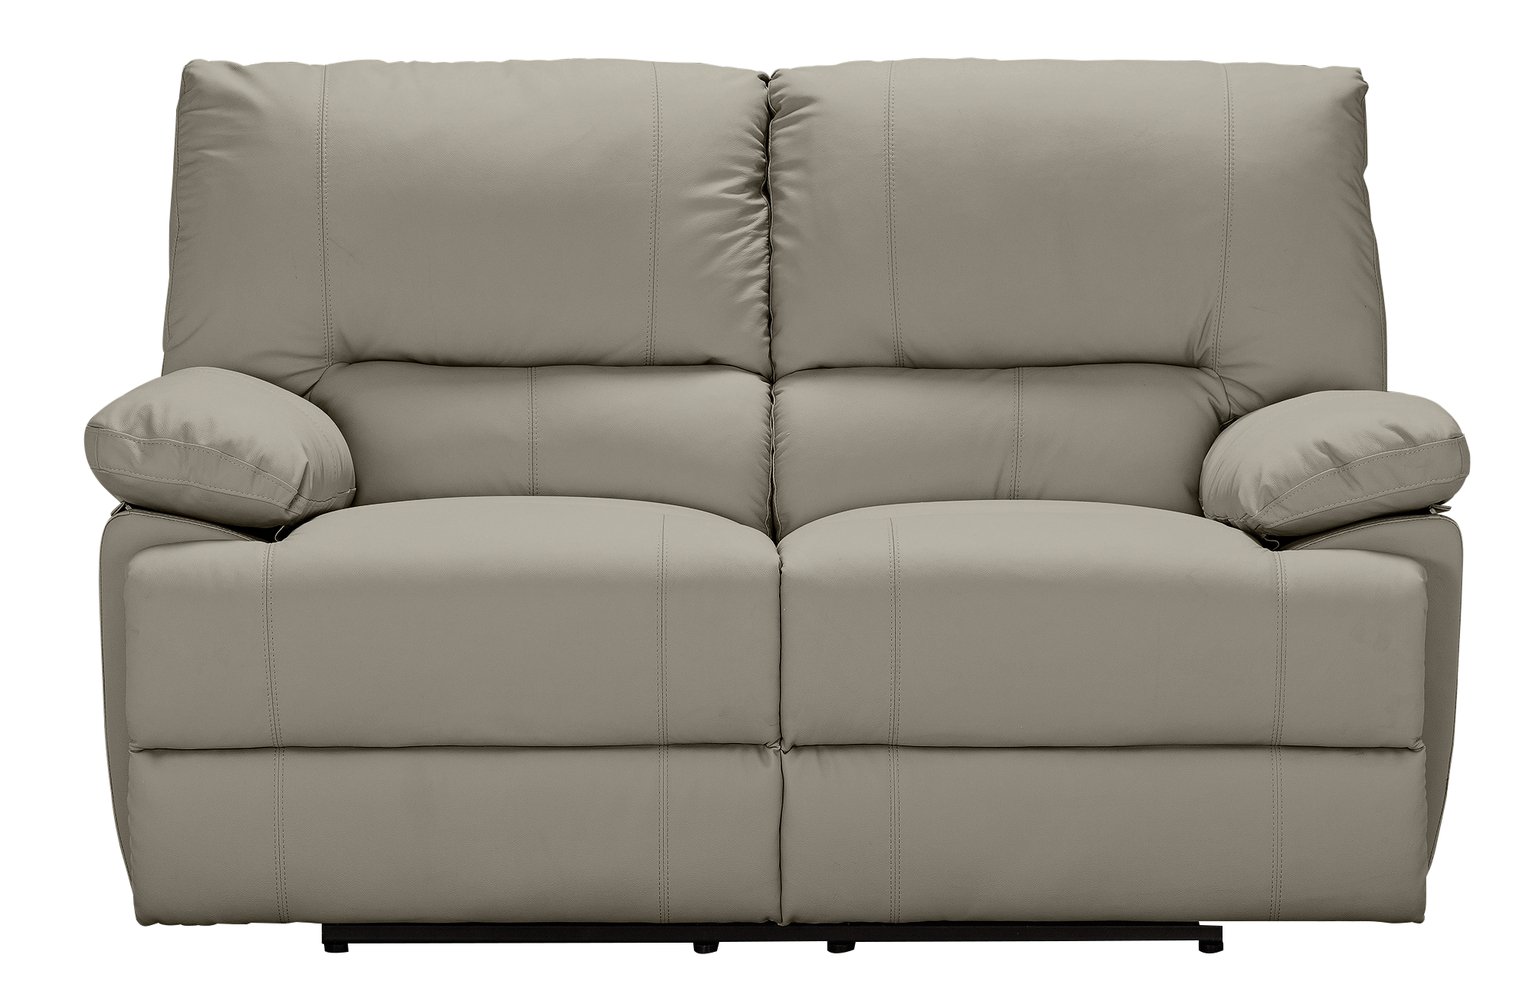 Argos Home Devlin 2 Seater Faux Leather Recliner Sofa - Grey